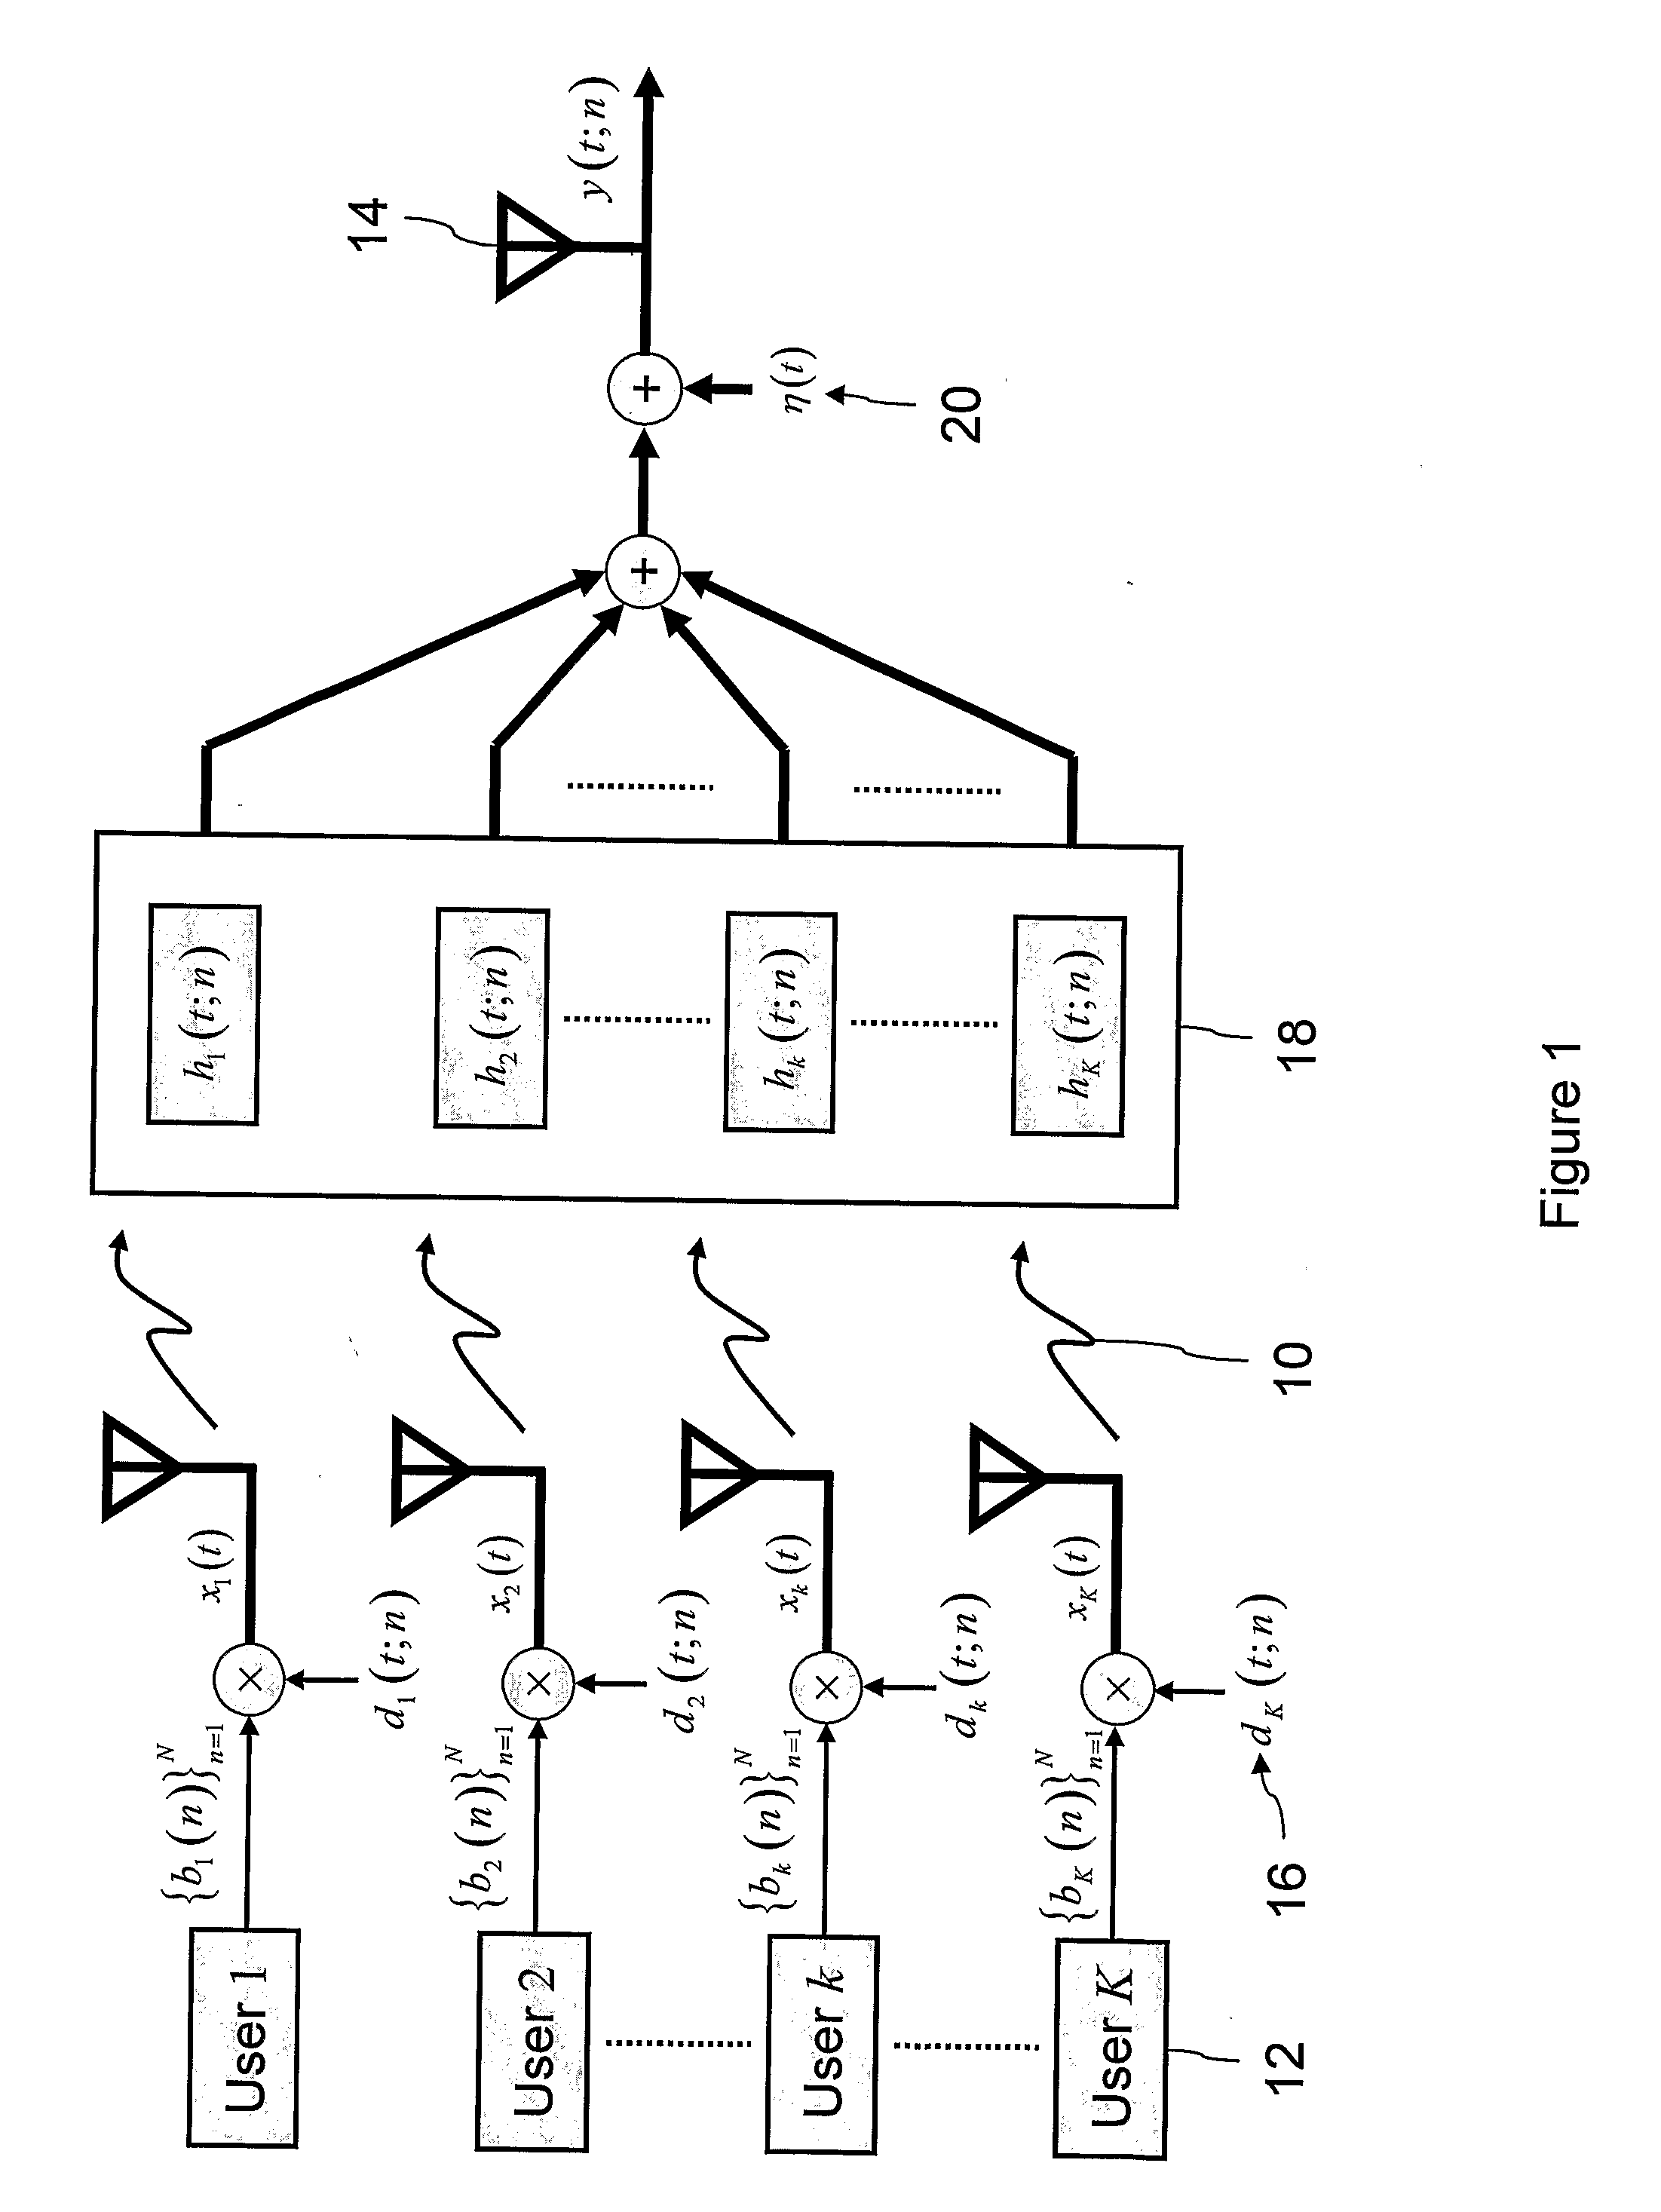 Method and system for adaptive duplicated filters and interference cancellation